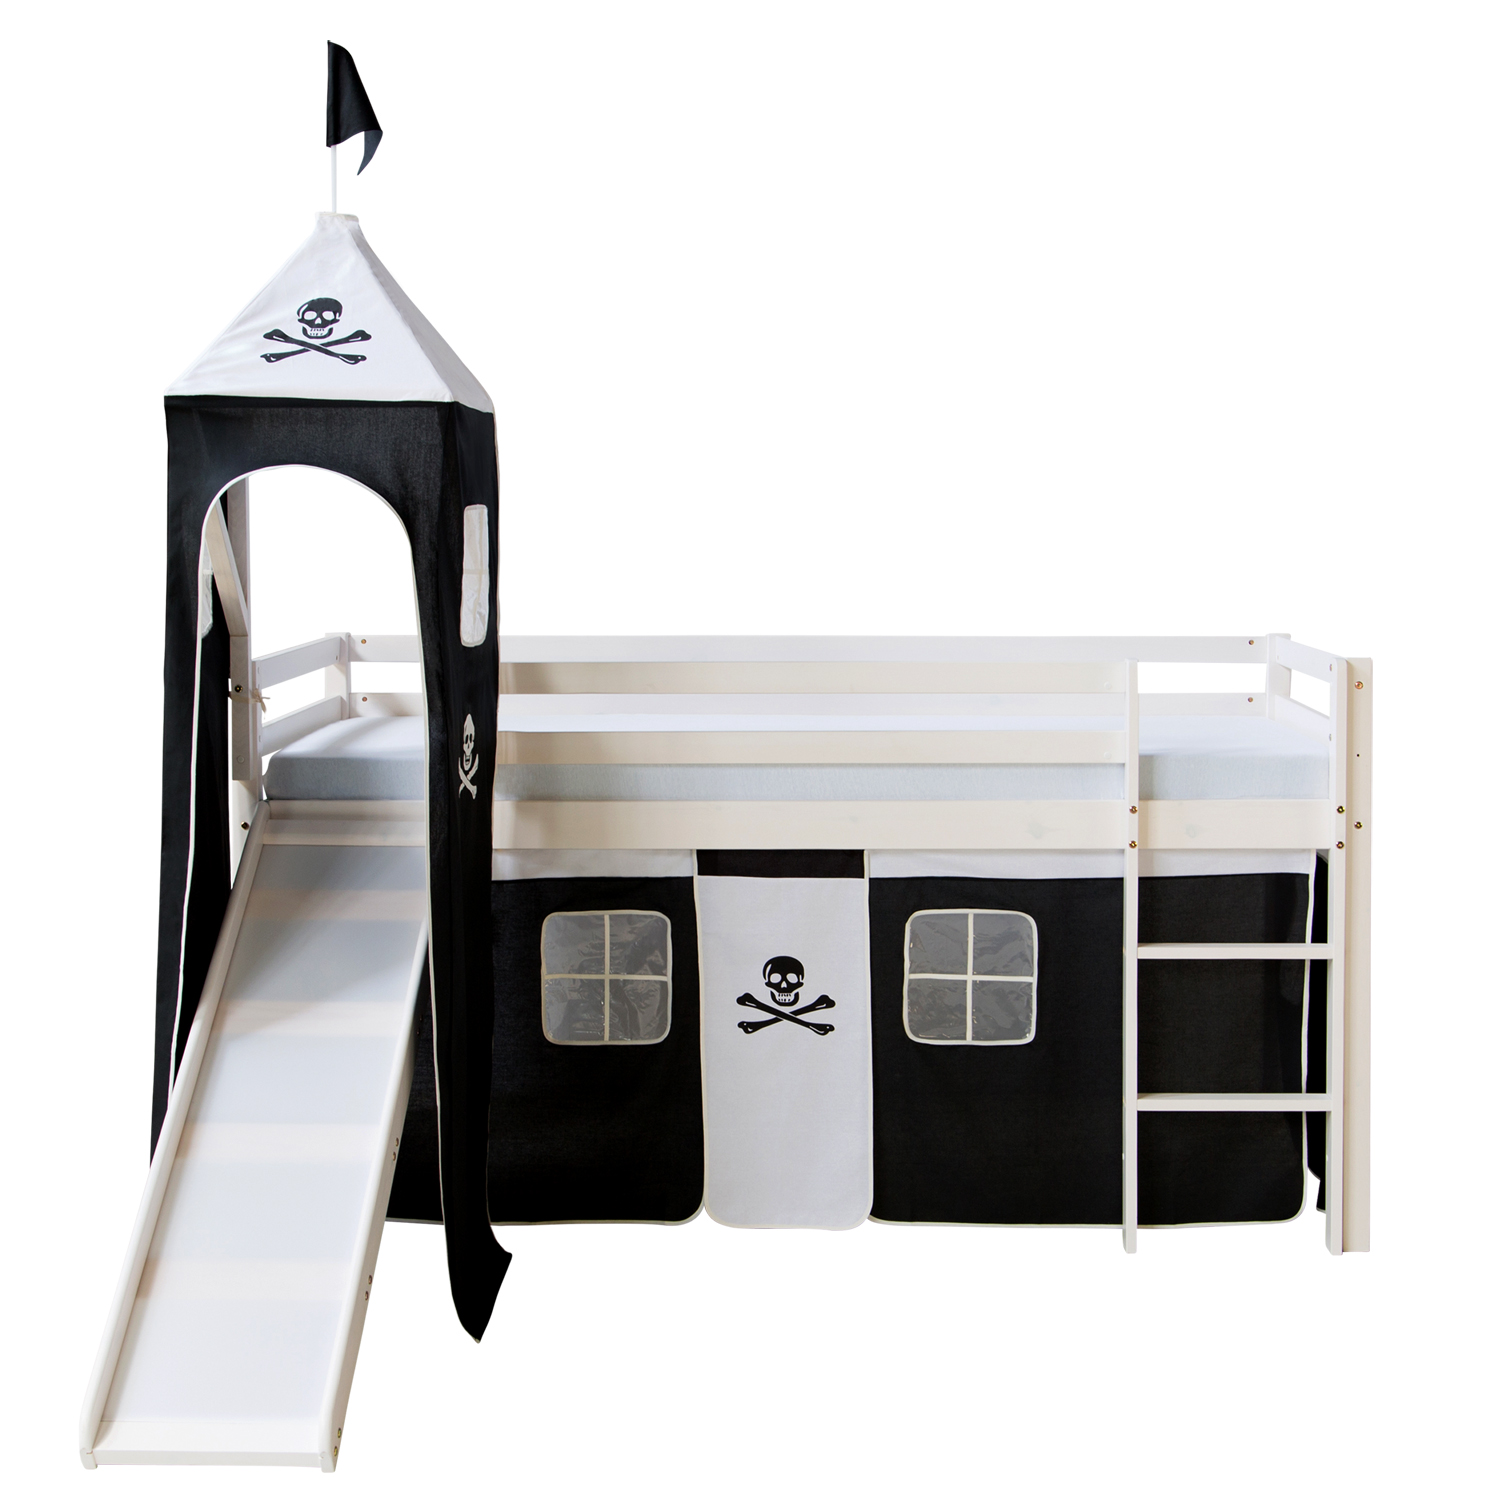 Loftbed 90x200 cm Bunk bed Childrens bed Solid Pine Wood Tower Tunnel Curtain Black Pirate Slide Mattress Slats